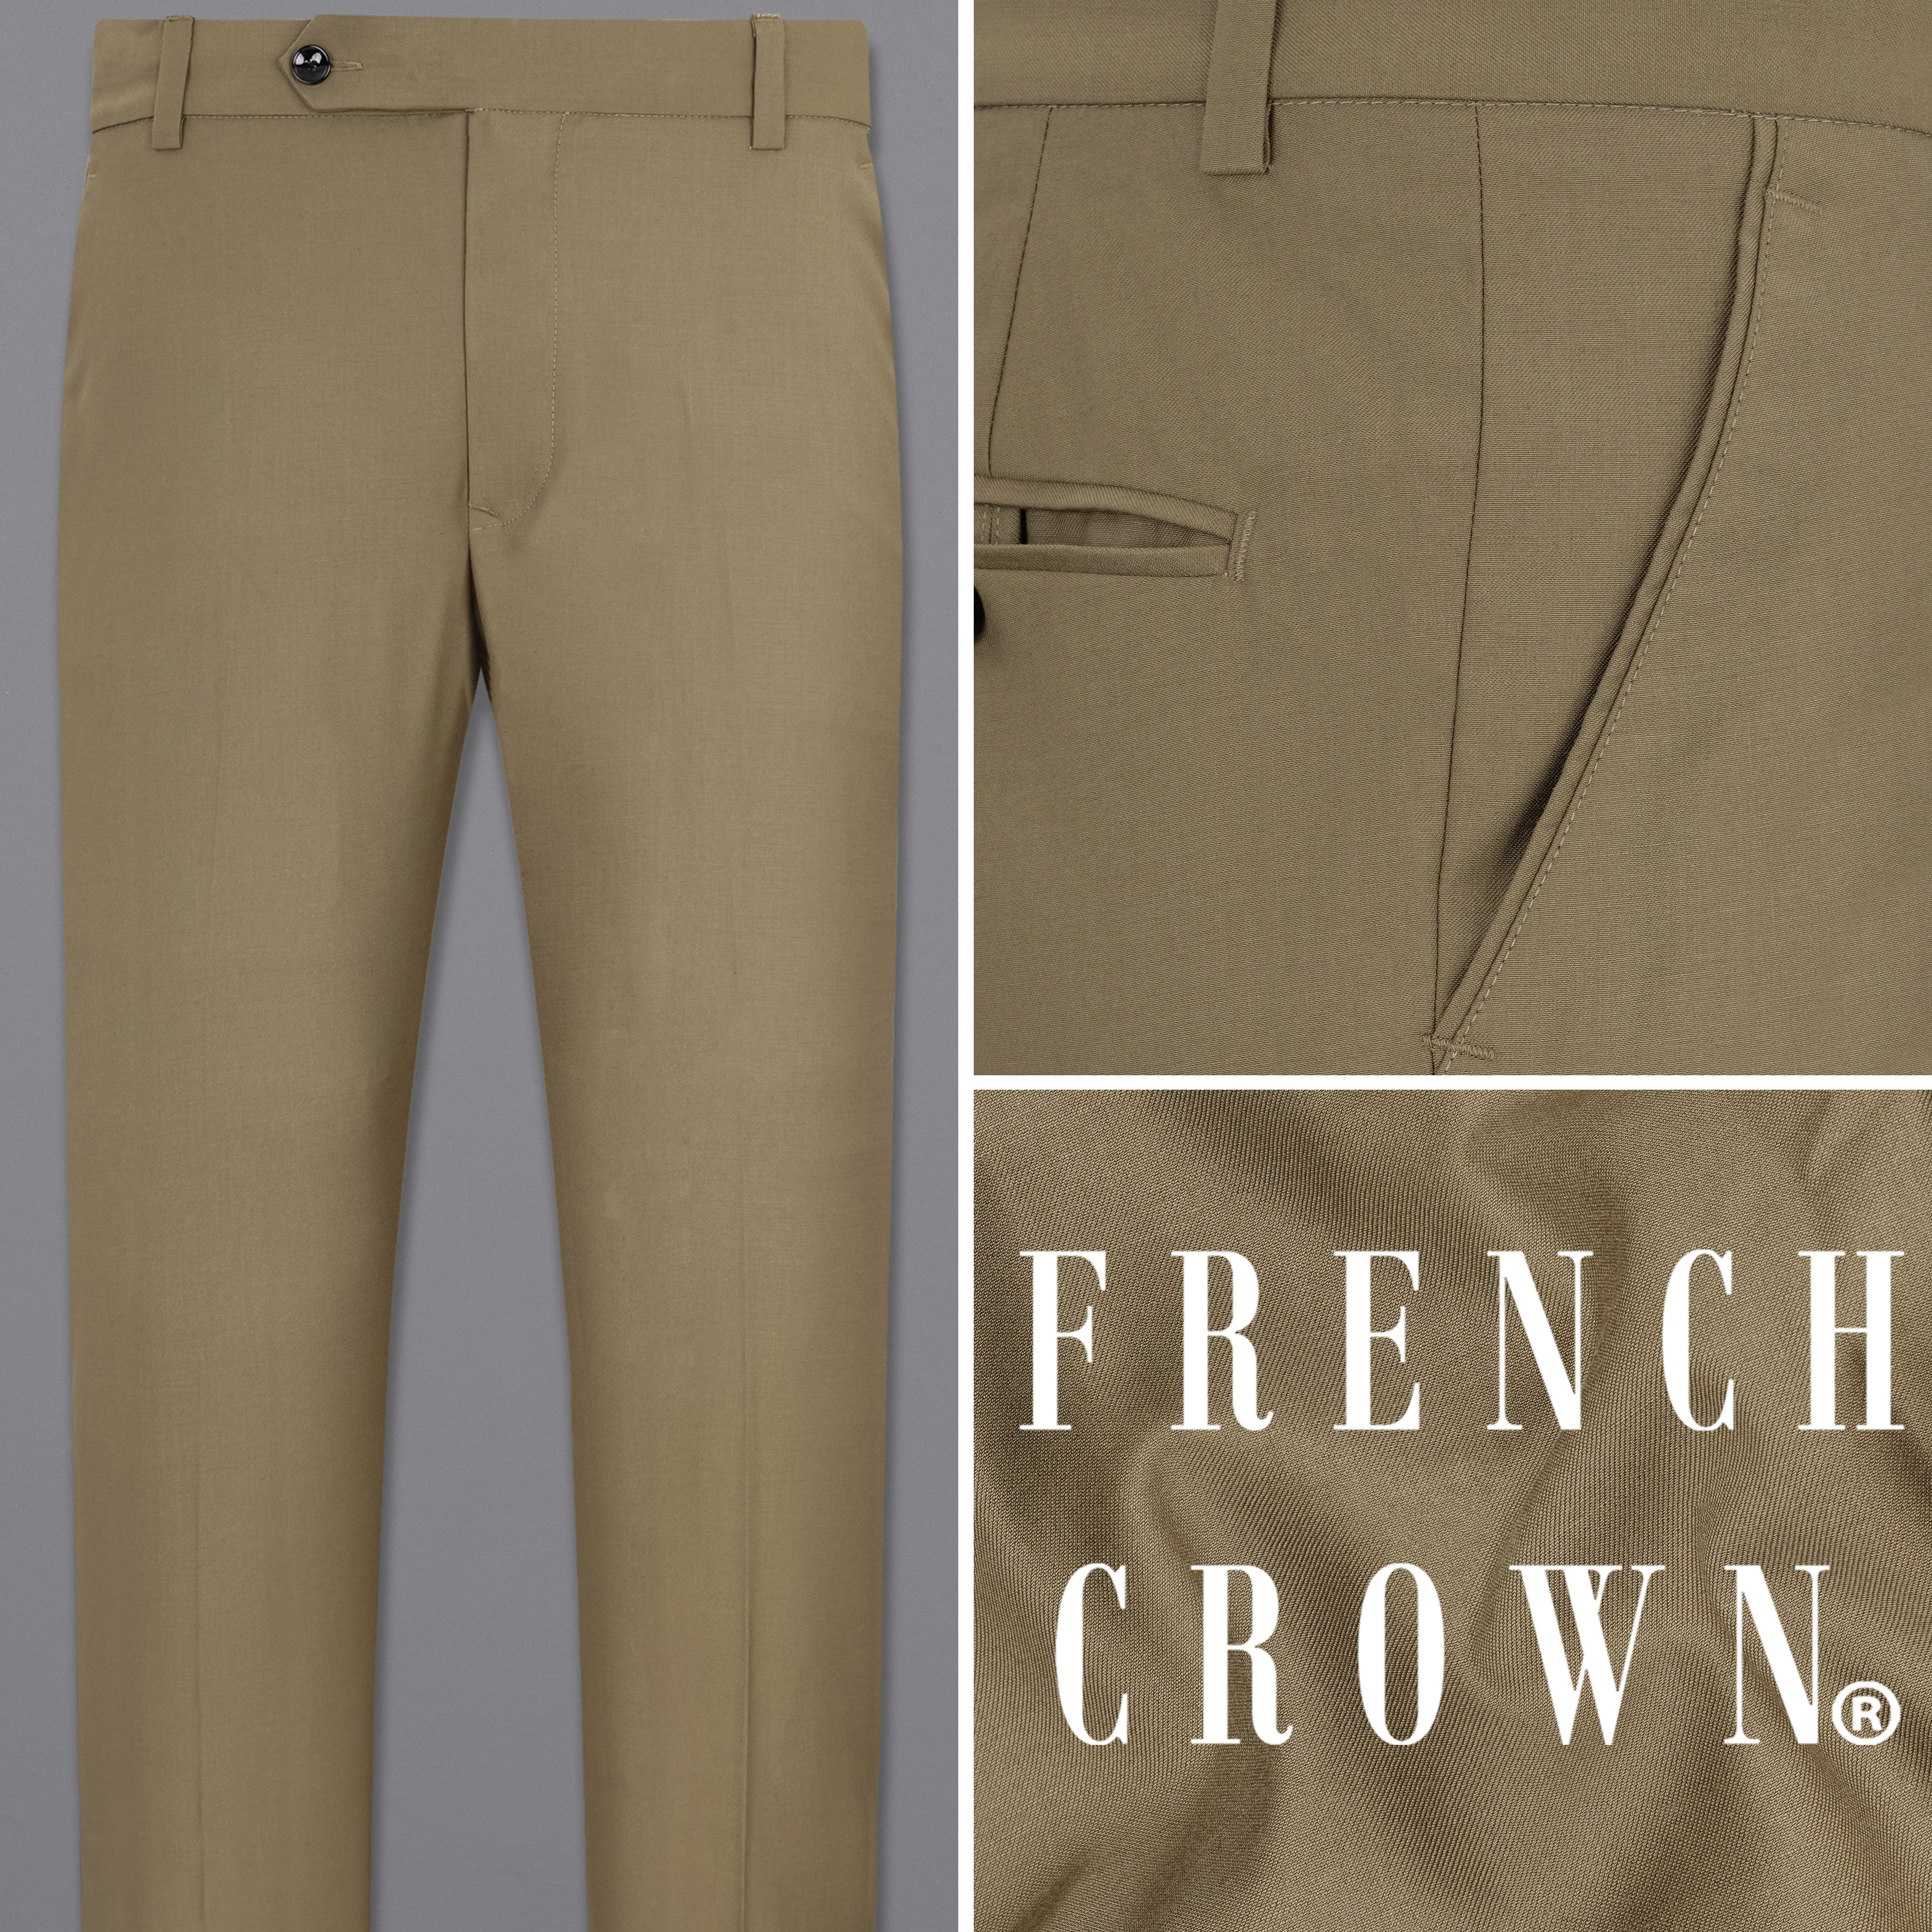 Buy Air Oyster Beige Trouser